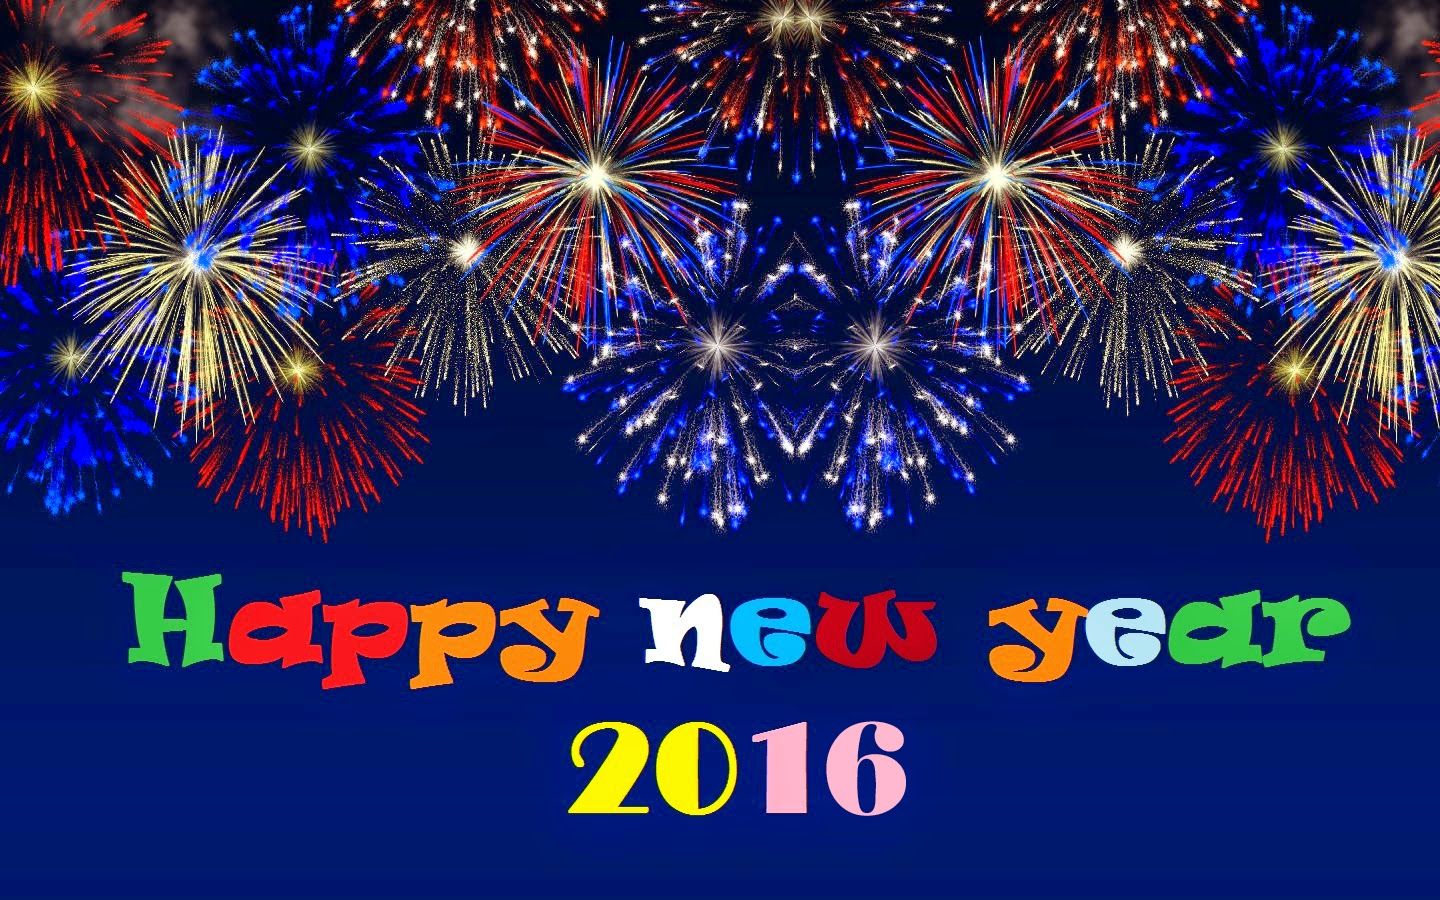 Happy New Year 2016 SMS Messages Wallpapers | Happy New Year 2016 ...